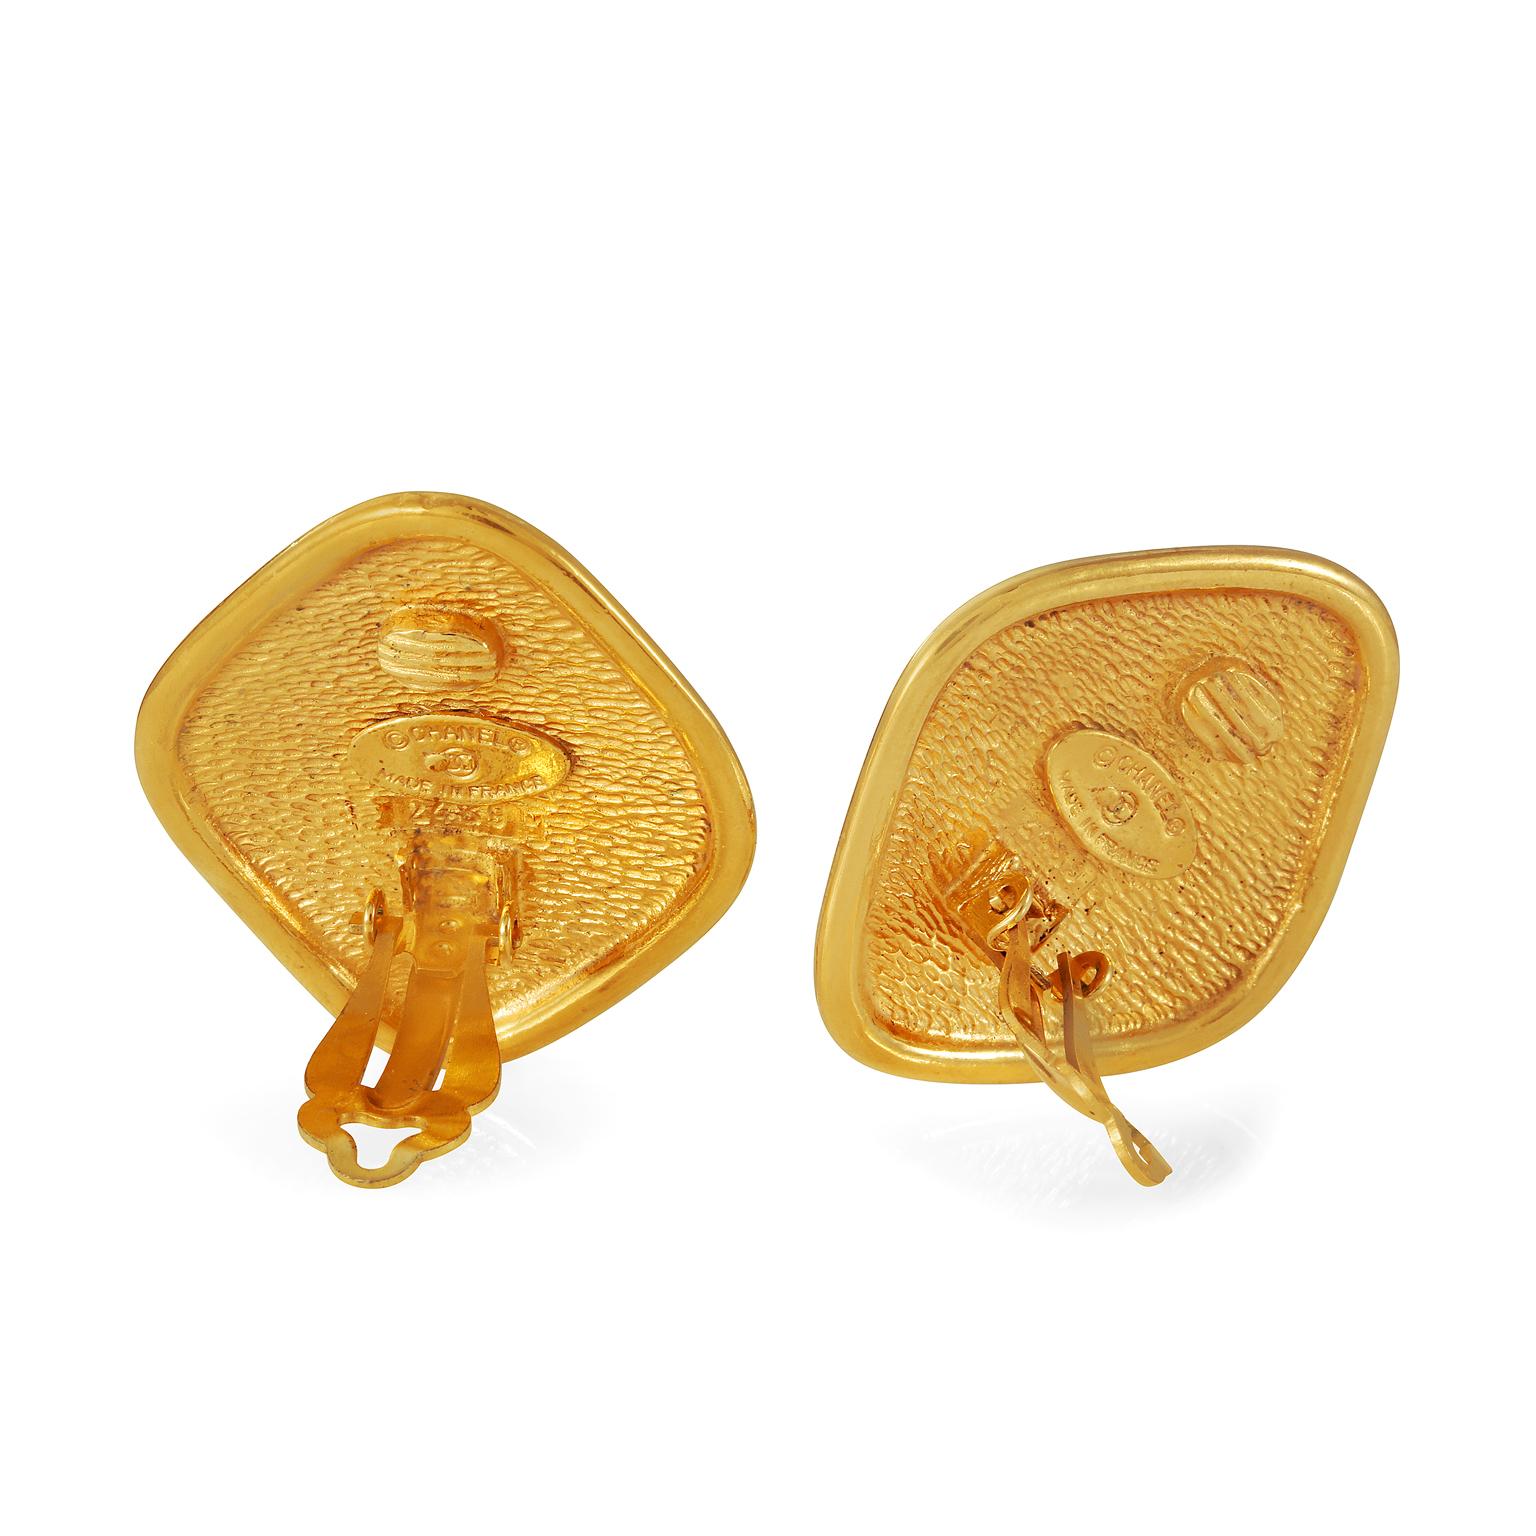 These authentic Chanel Gold RUE CAMBON Earrings are in excellent vintage condition from the early 1980’s. Gold diamond shaped clip on earring is etched with CHANEL 31 RUE CAMBON lettering and an interlocking CC.  Clip on closure. Made in France. 